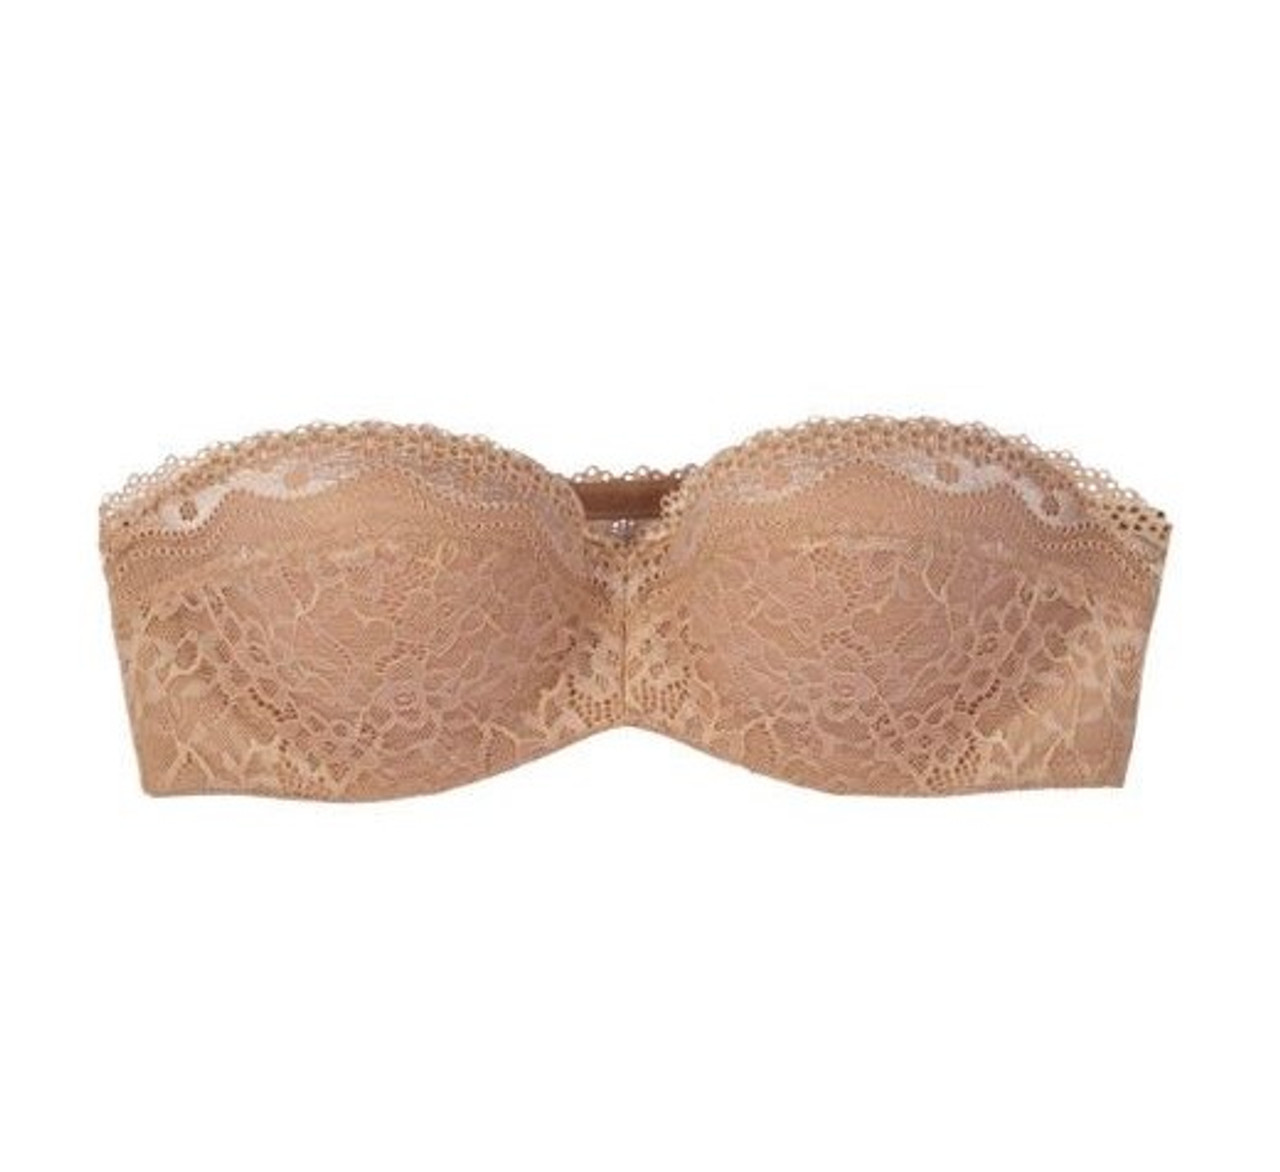 B.tempt'd B.enticing Strapless Bra in Au Natural - Busted Bra Shop